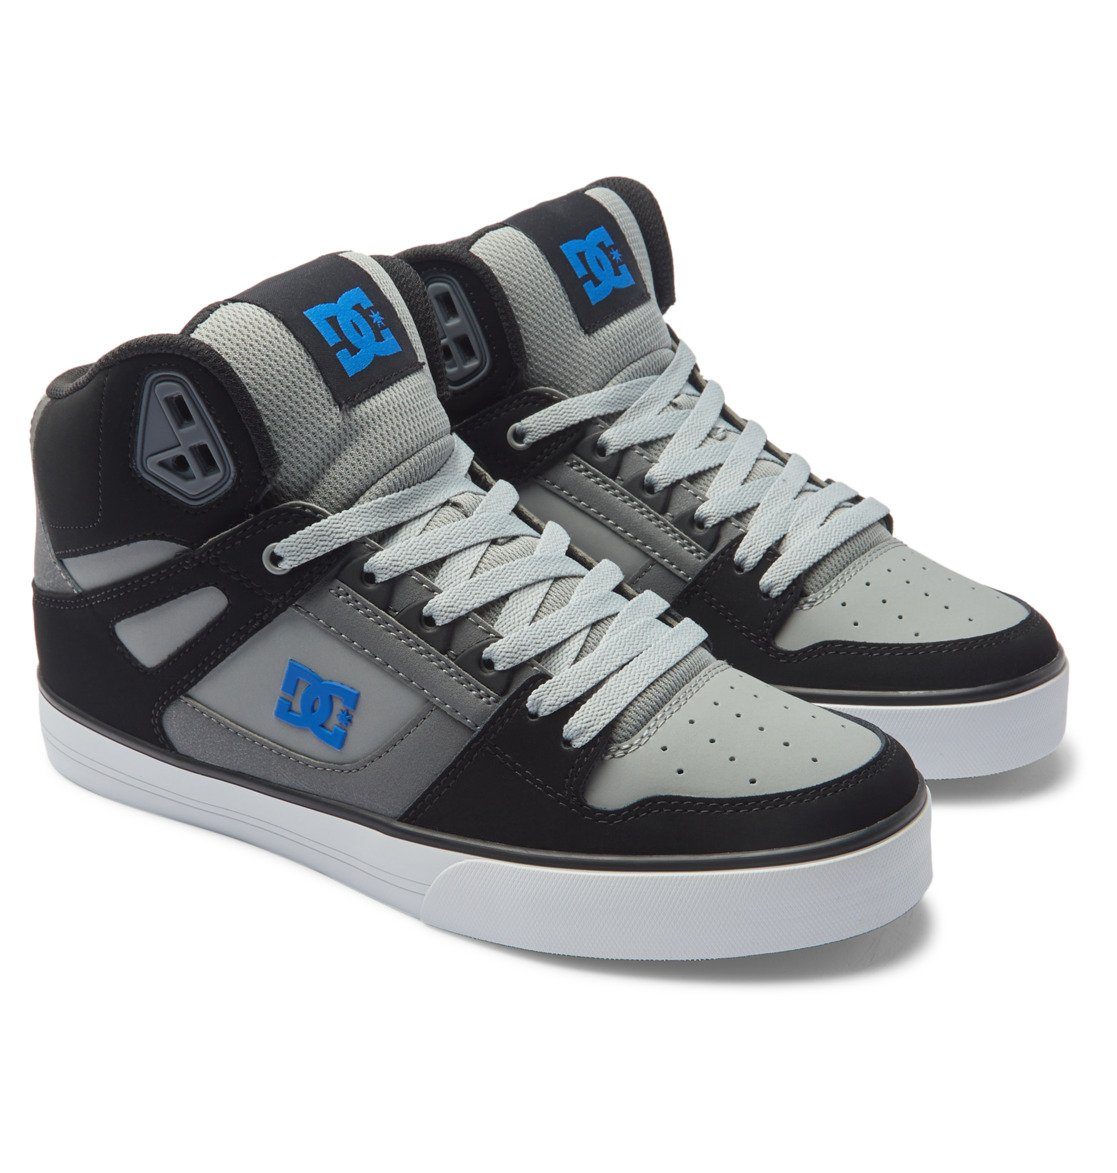 DC Shoes Pure High-Top Sneaker Black/Grey/Blue